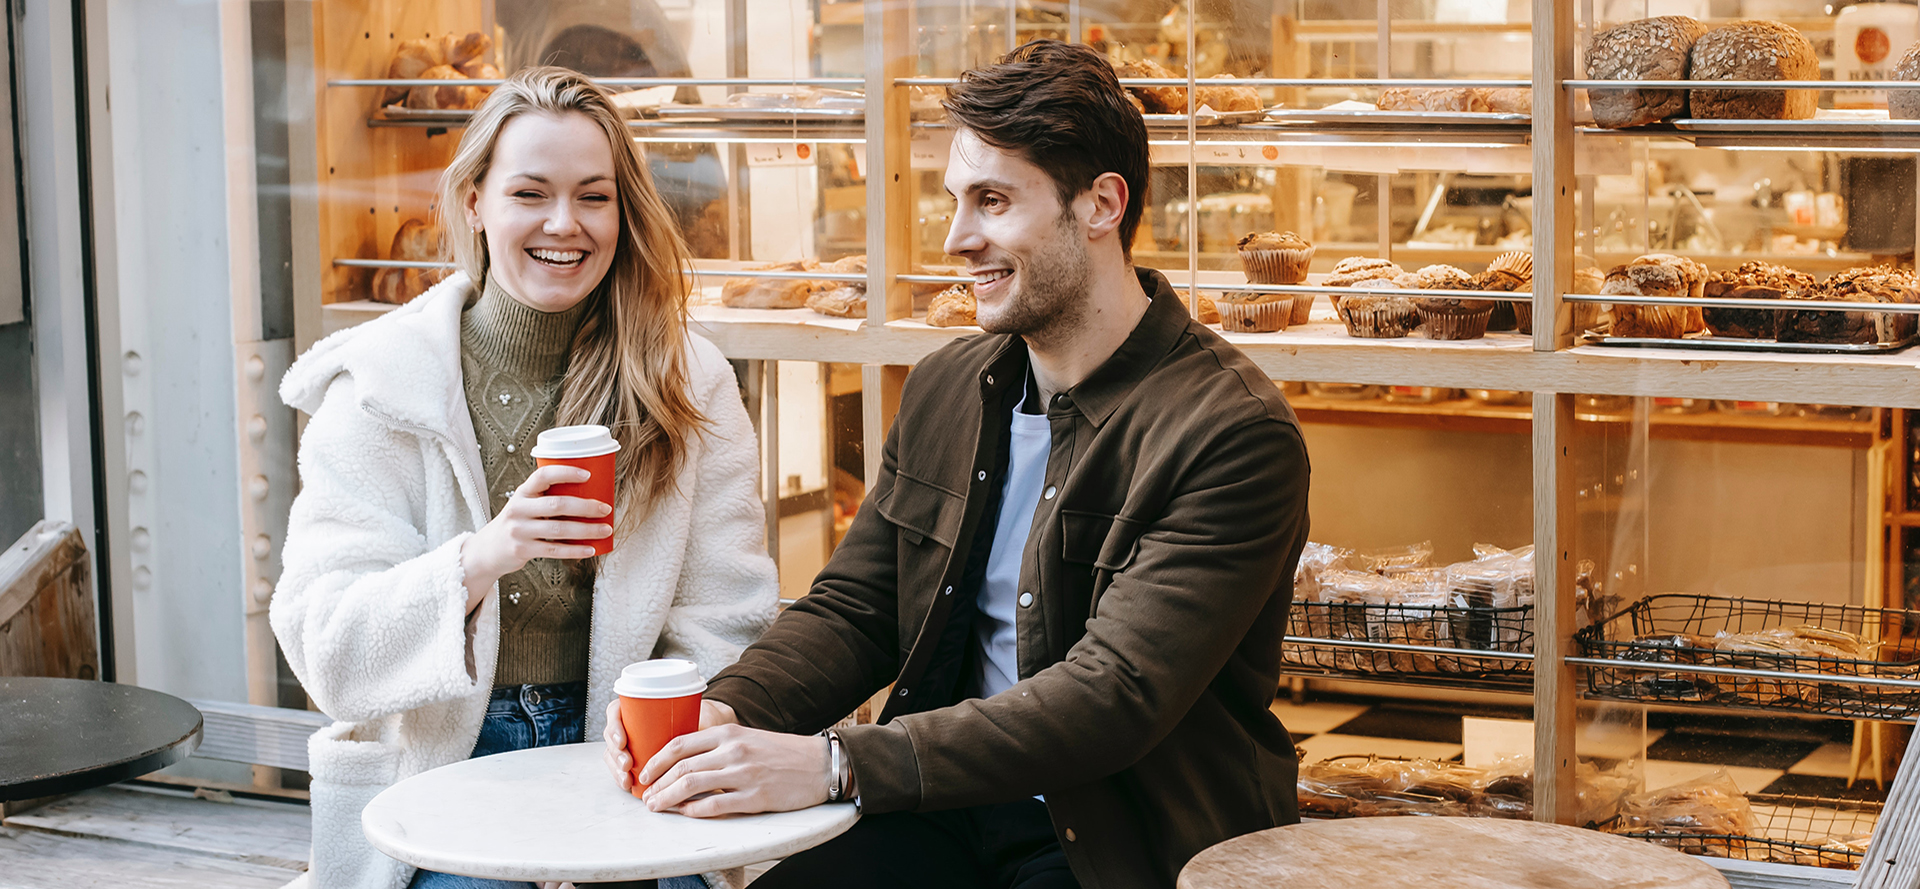 Sober singles on a date are drinking coffee and laughing. 